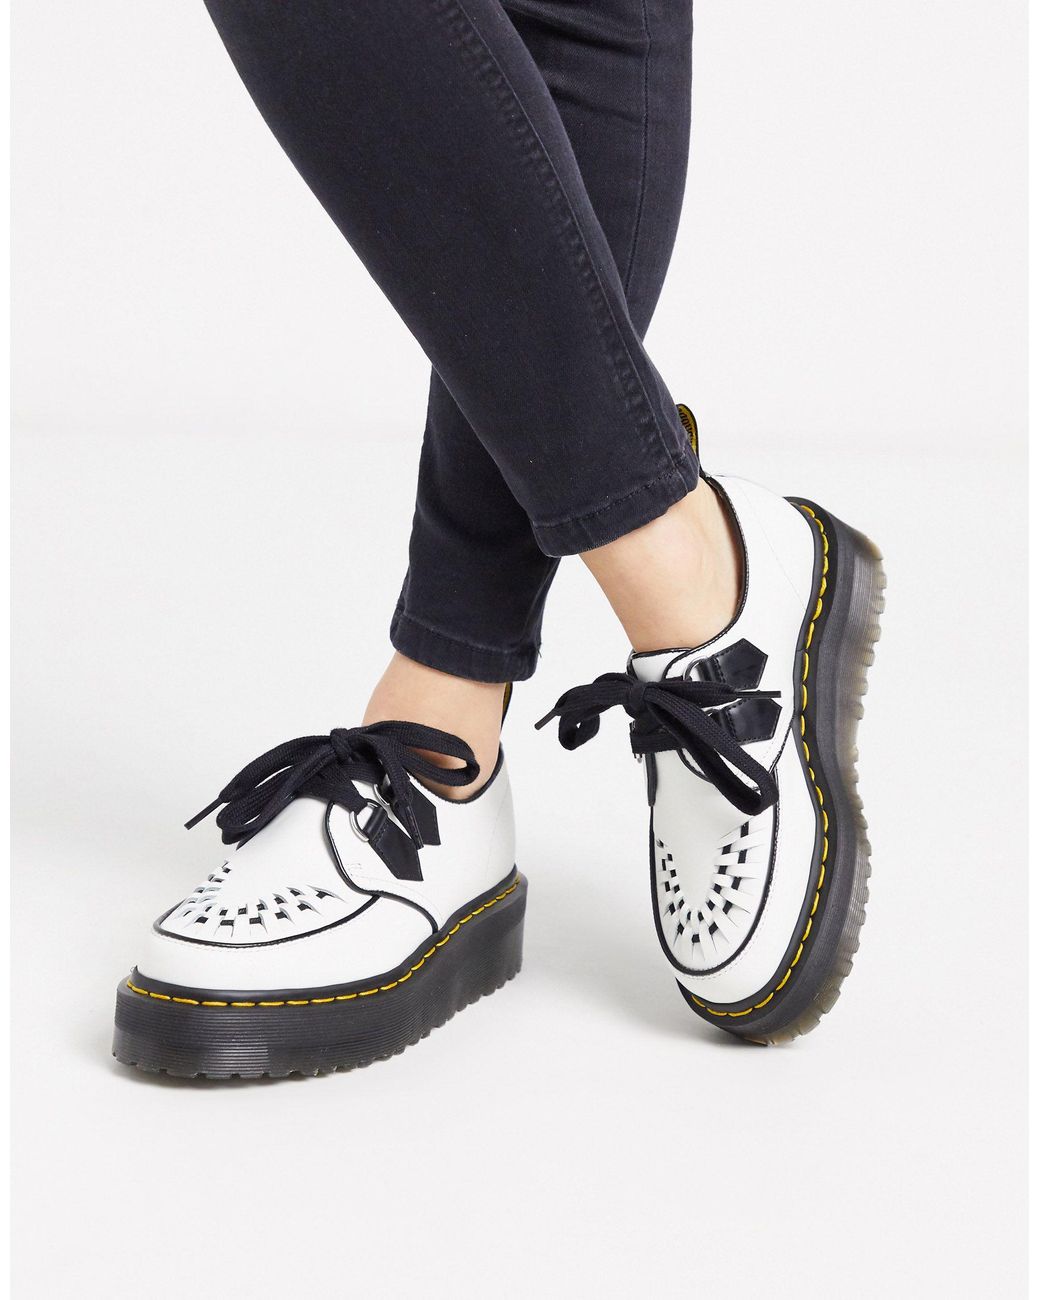 Dr. Martens Sidney Chunky Creeper Flat Shoes in Black | Lyst Australia